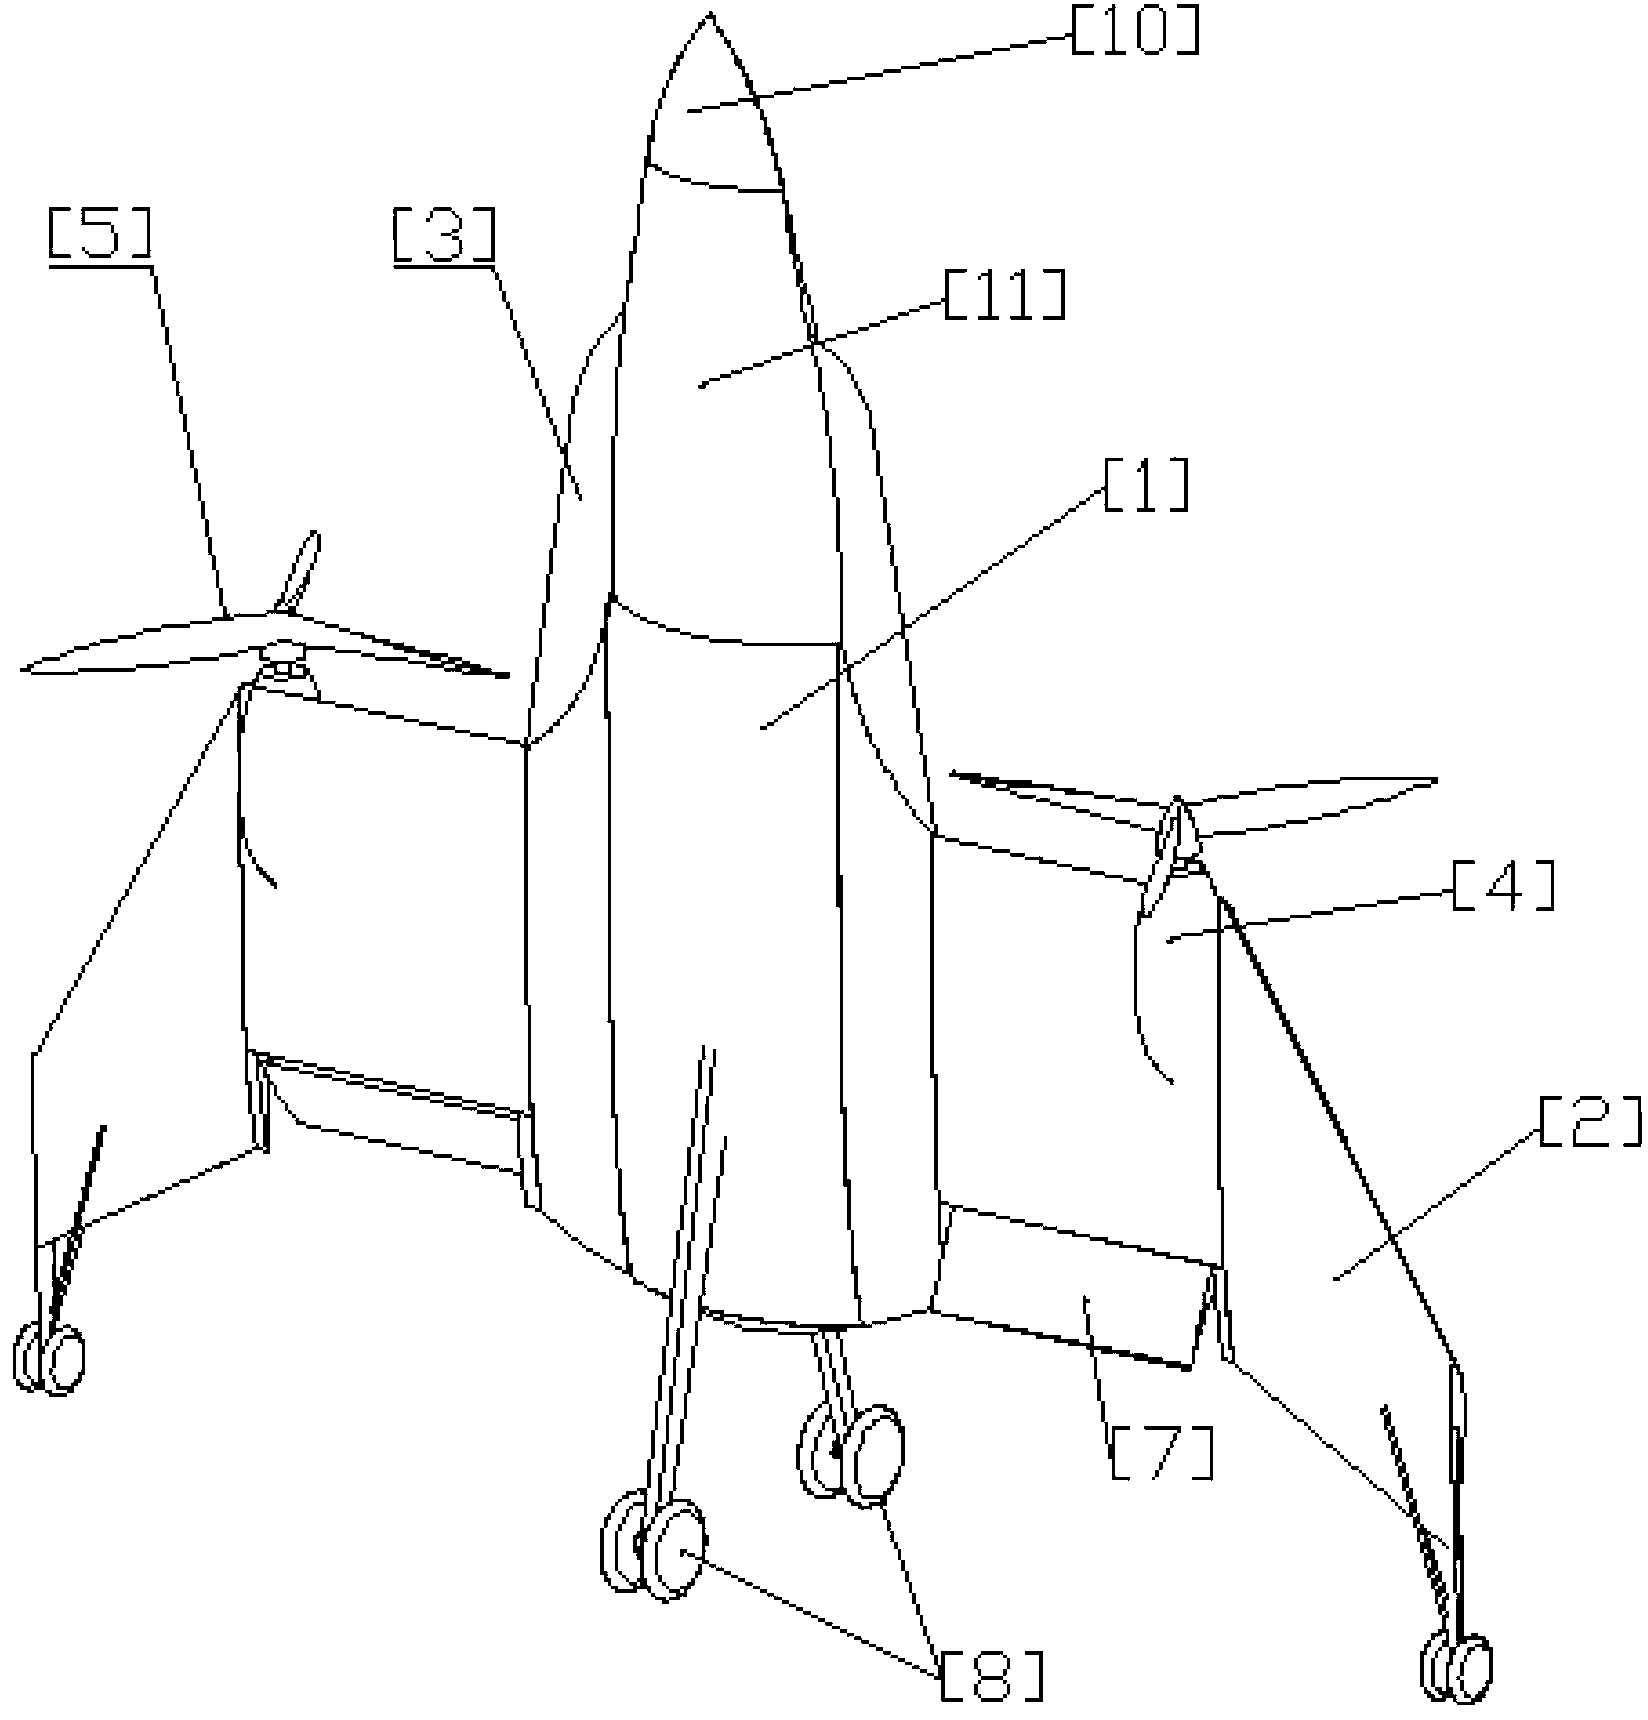 Tailless layout single tail seat type vertical take-off and landing aircraft